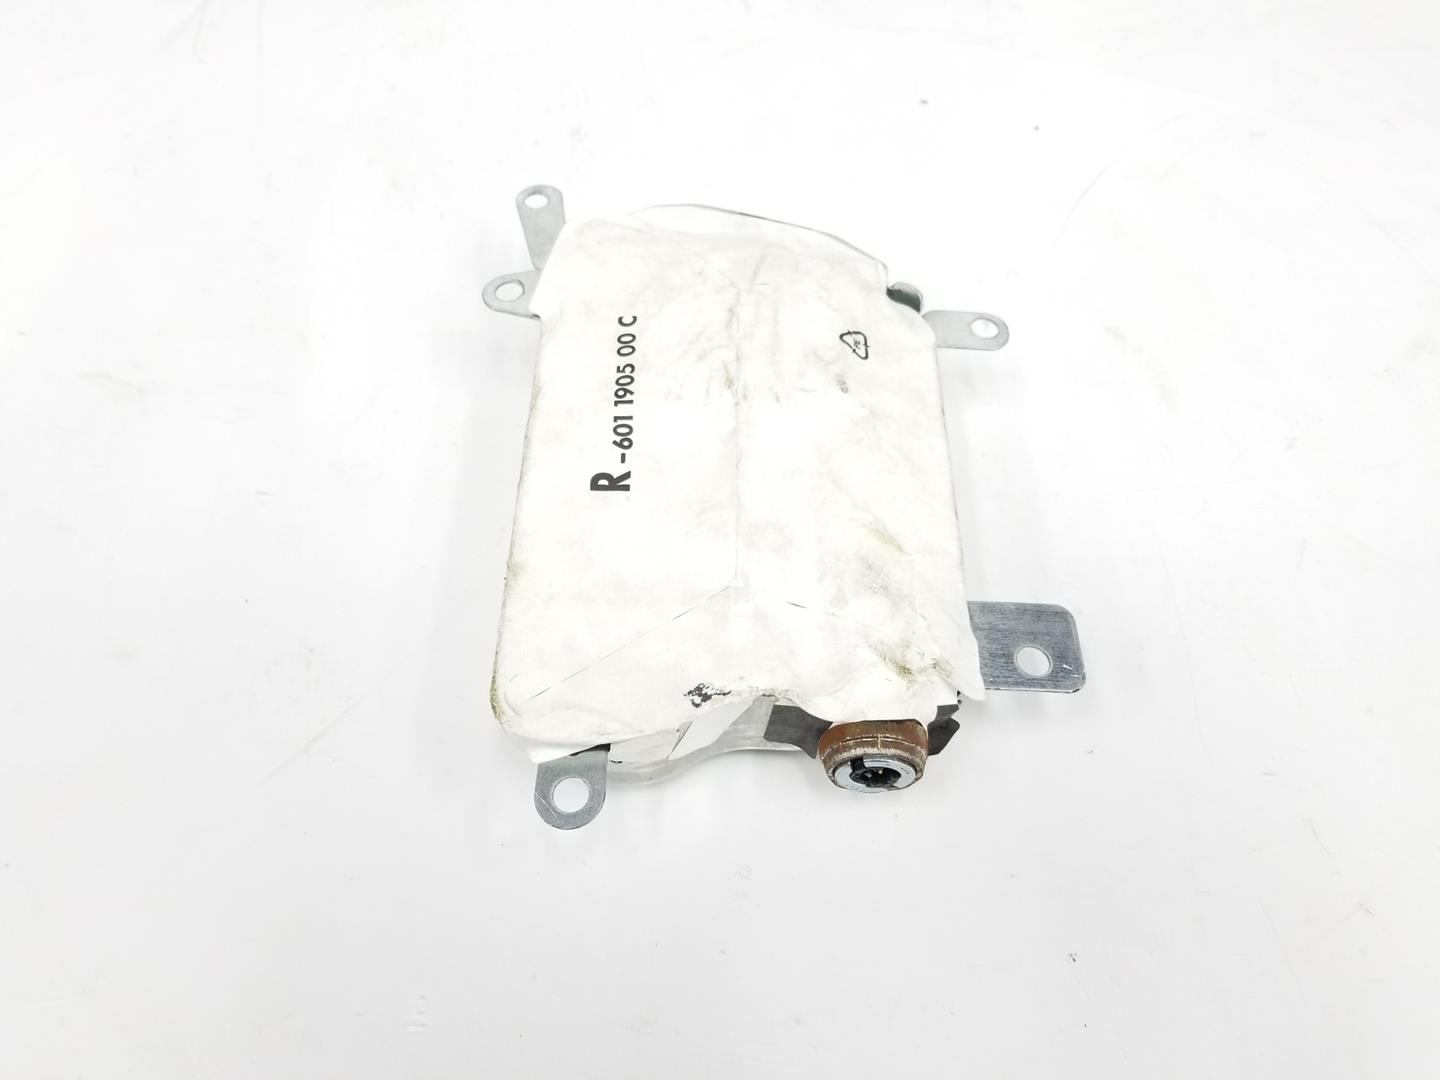 BMW 5 Series E60/E61 (2003-2010) Front Right Door Airbag SRS 6963022, 72126963022 19911651